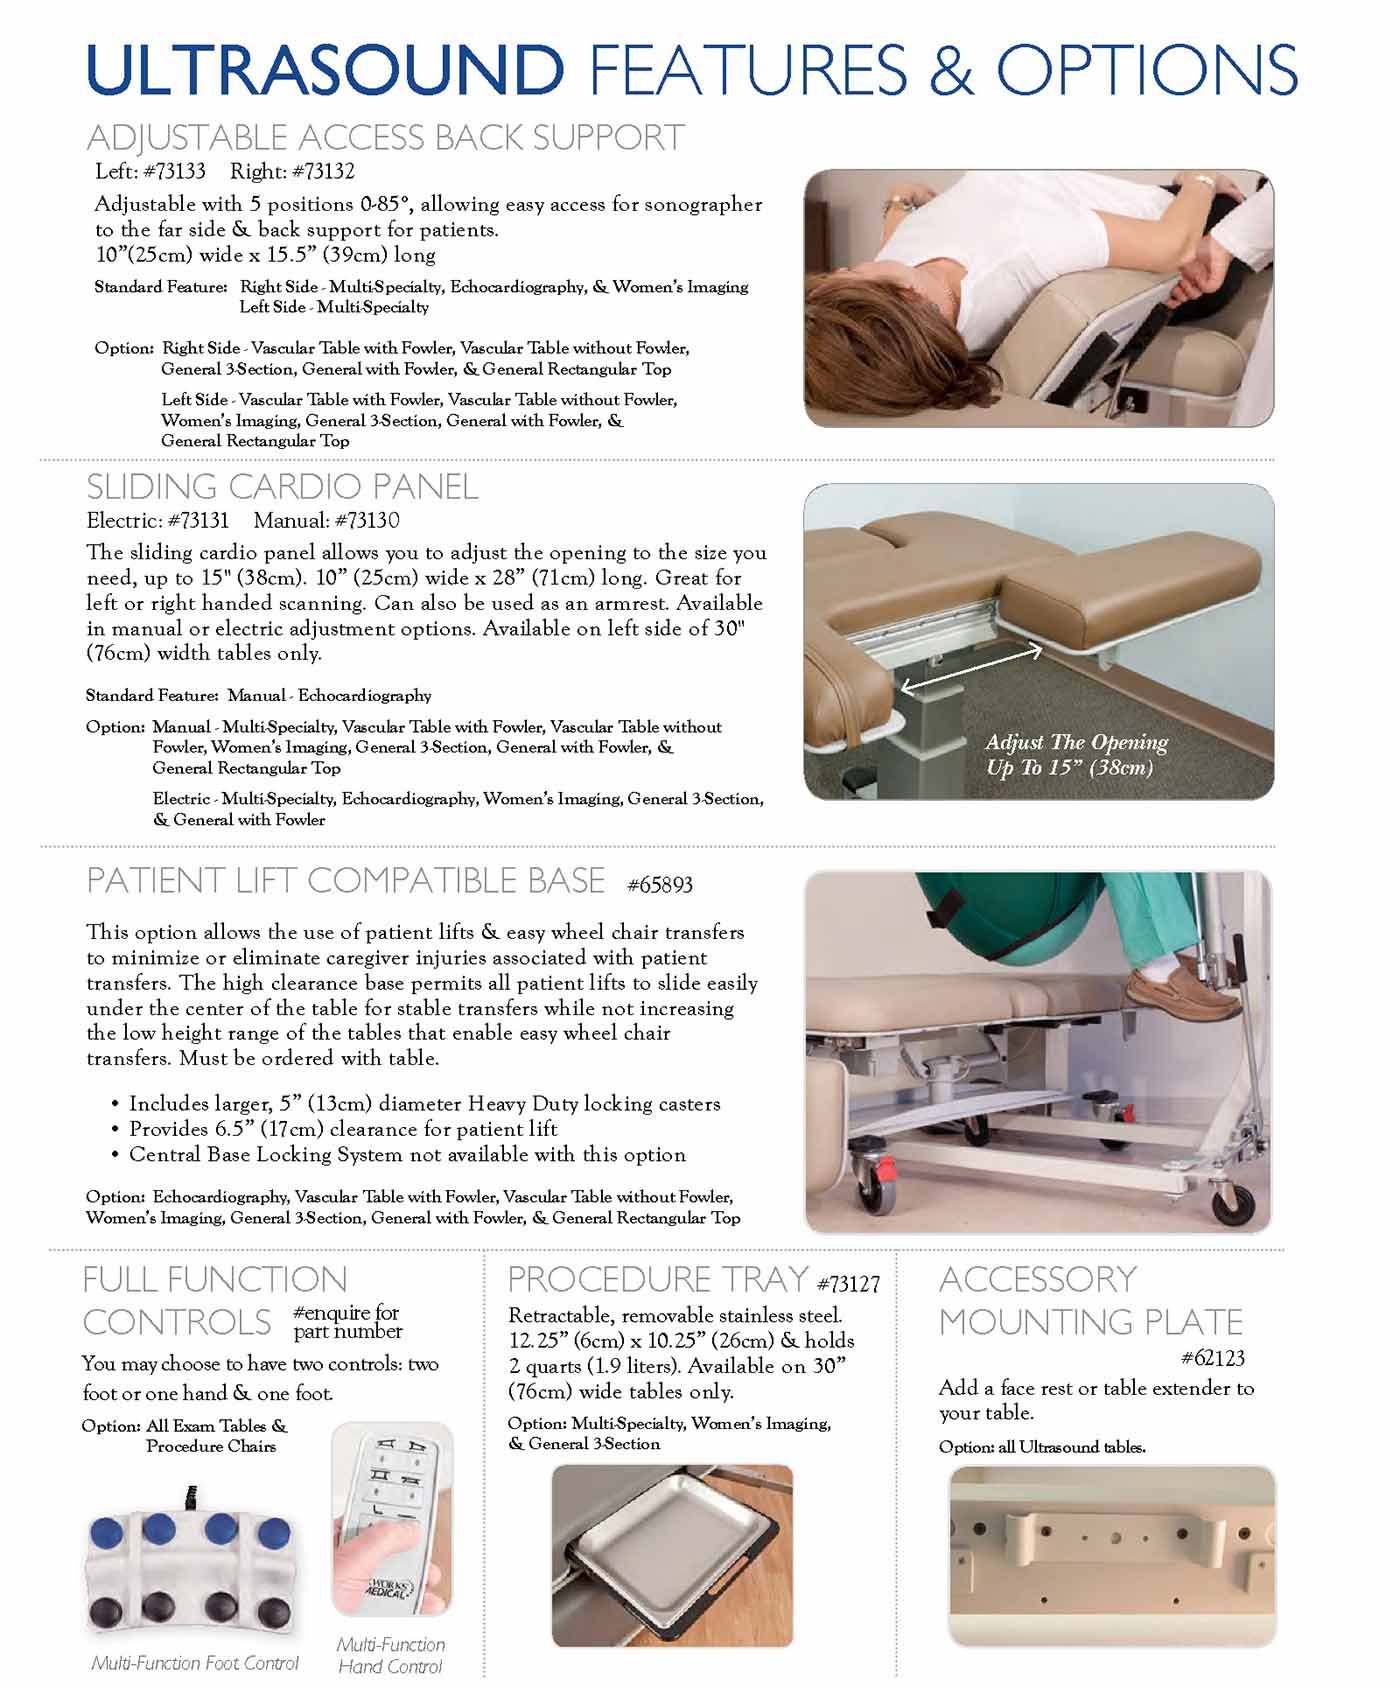 Arrow Life Medical Solution - ULTRASOUND Tables FEATURES, accessories and OPTIONS